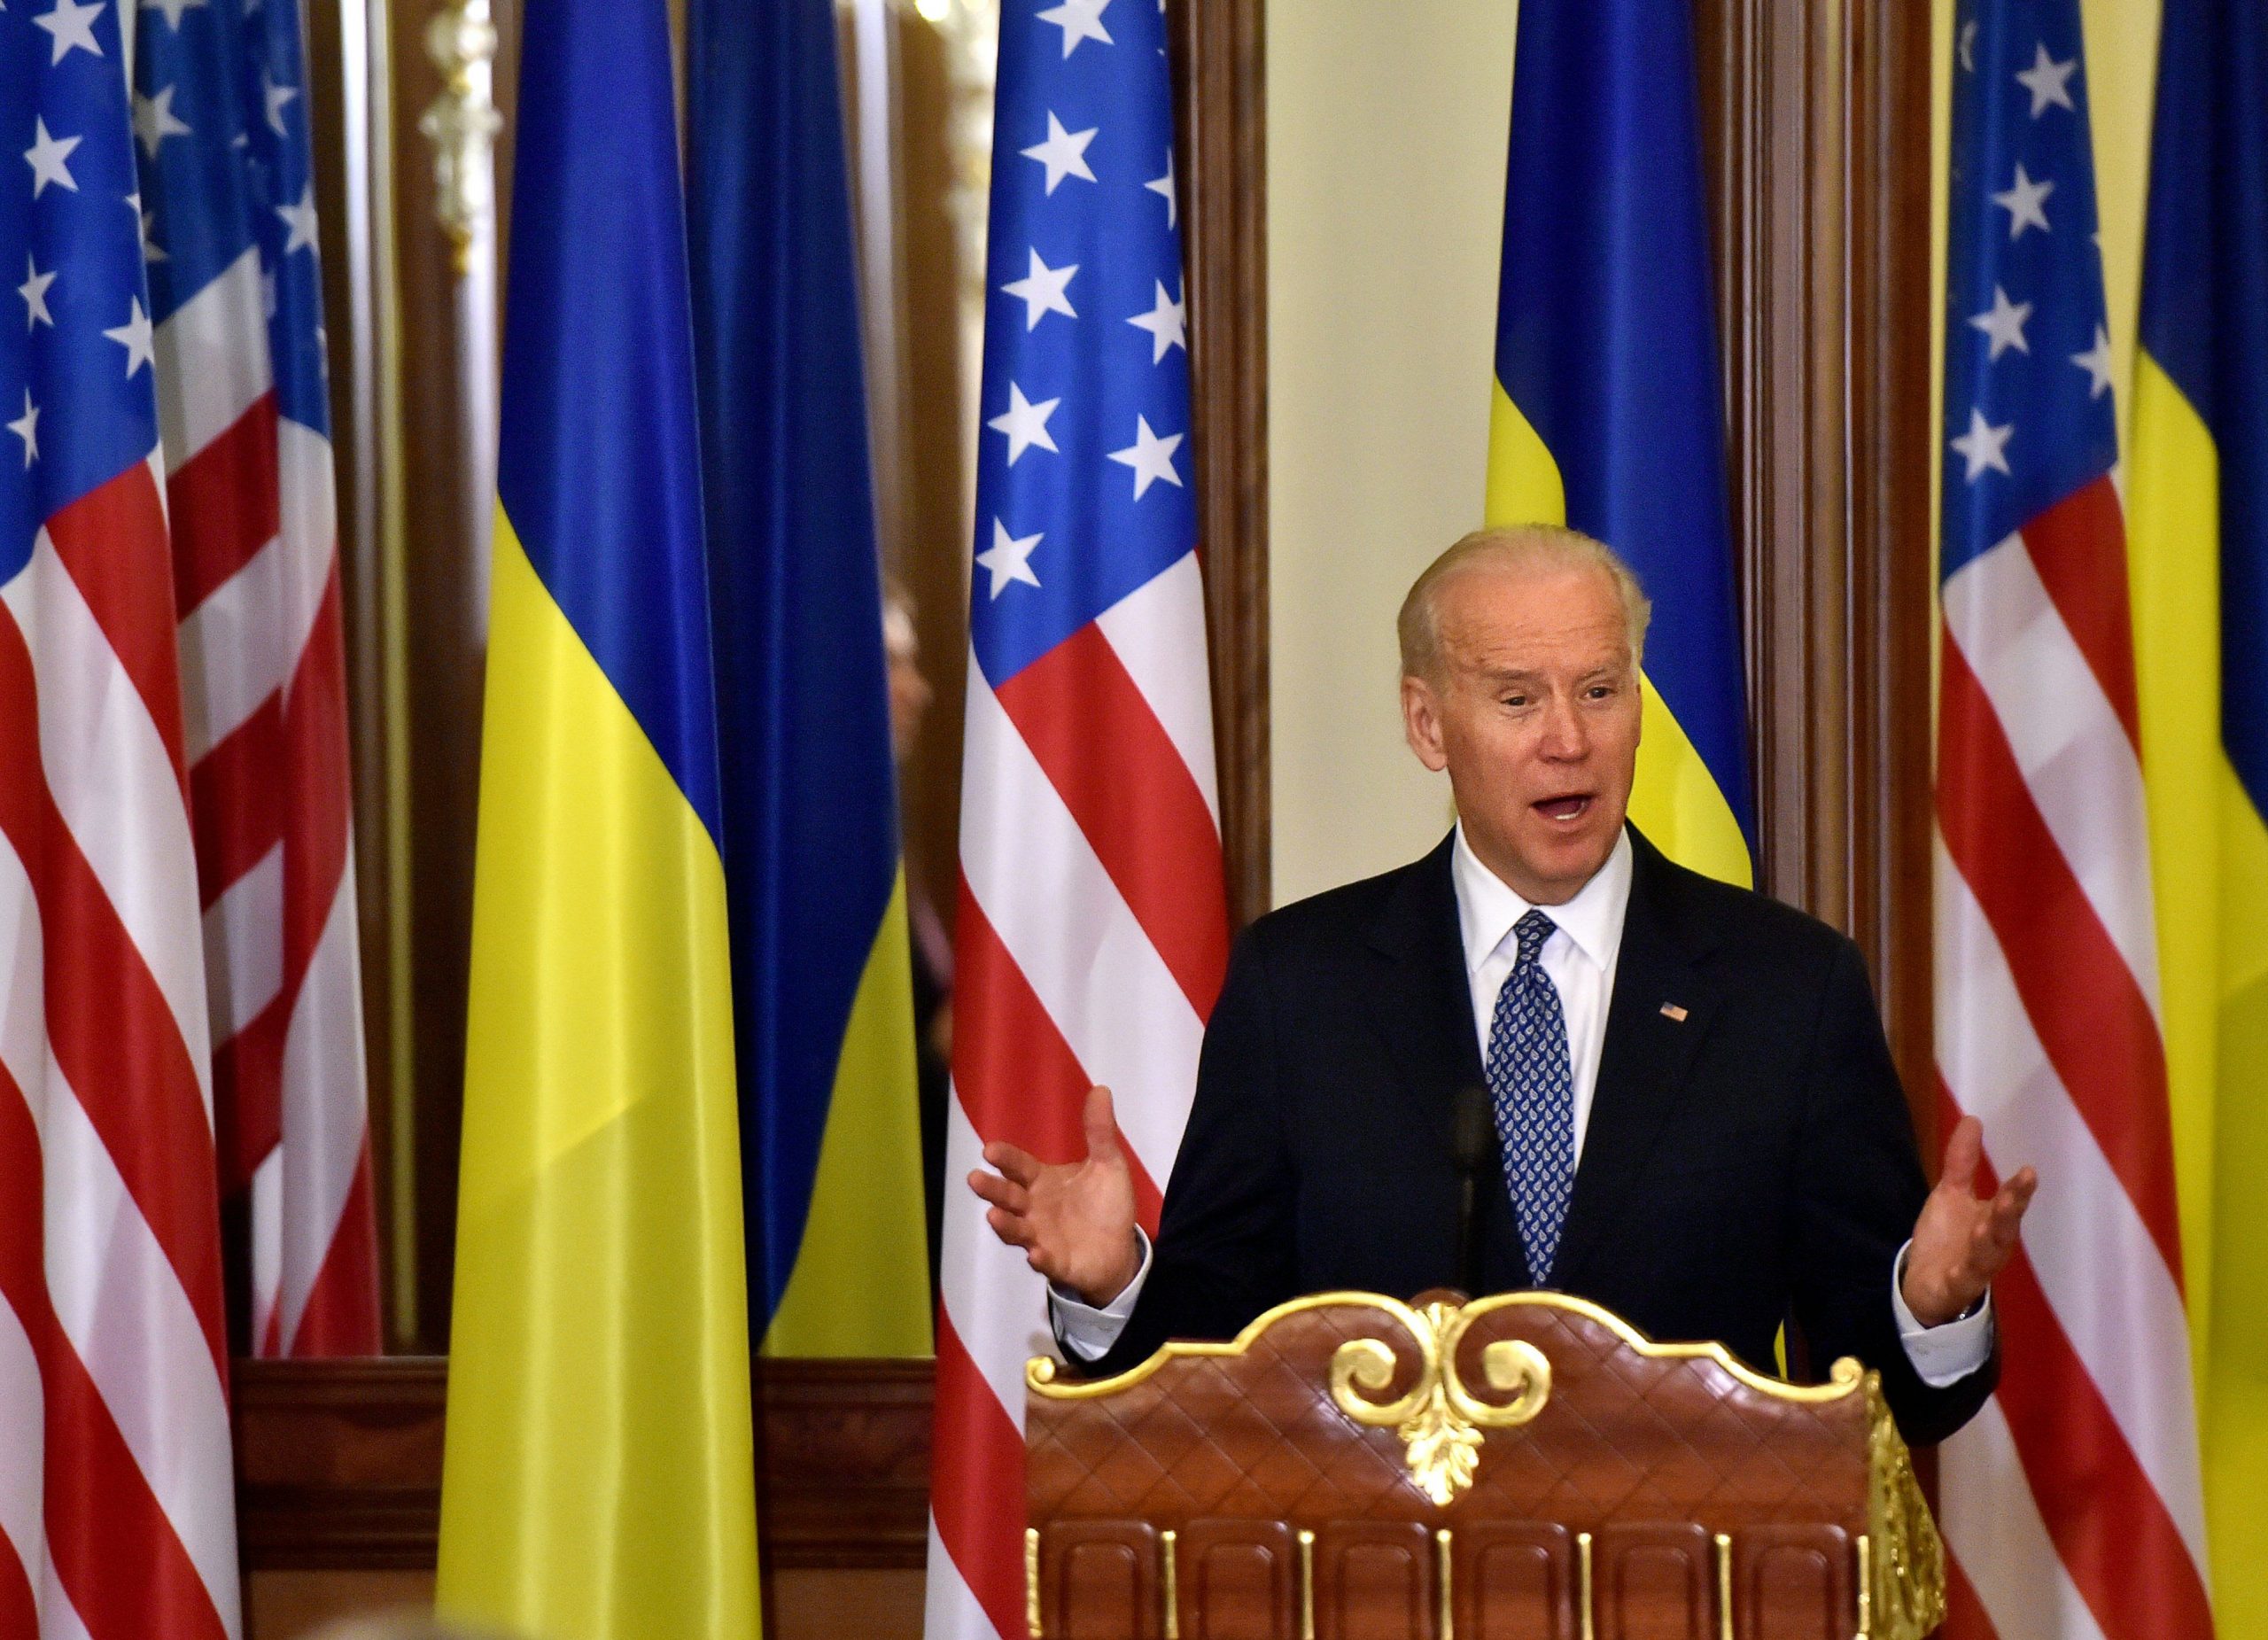 What Biden means to Russia

